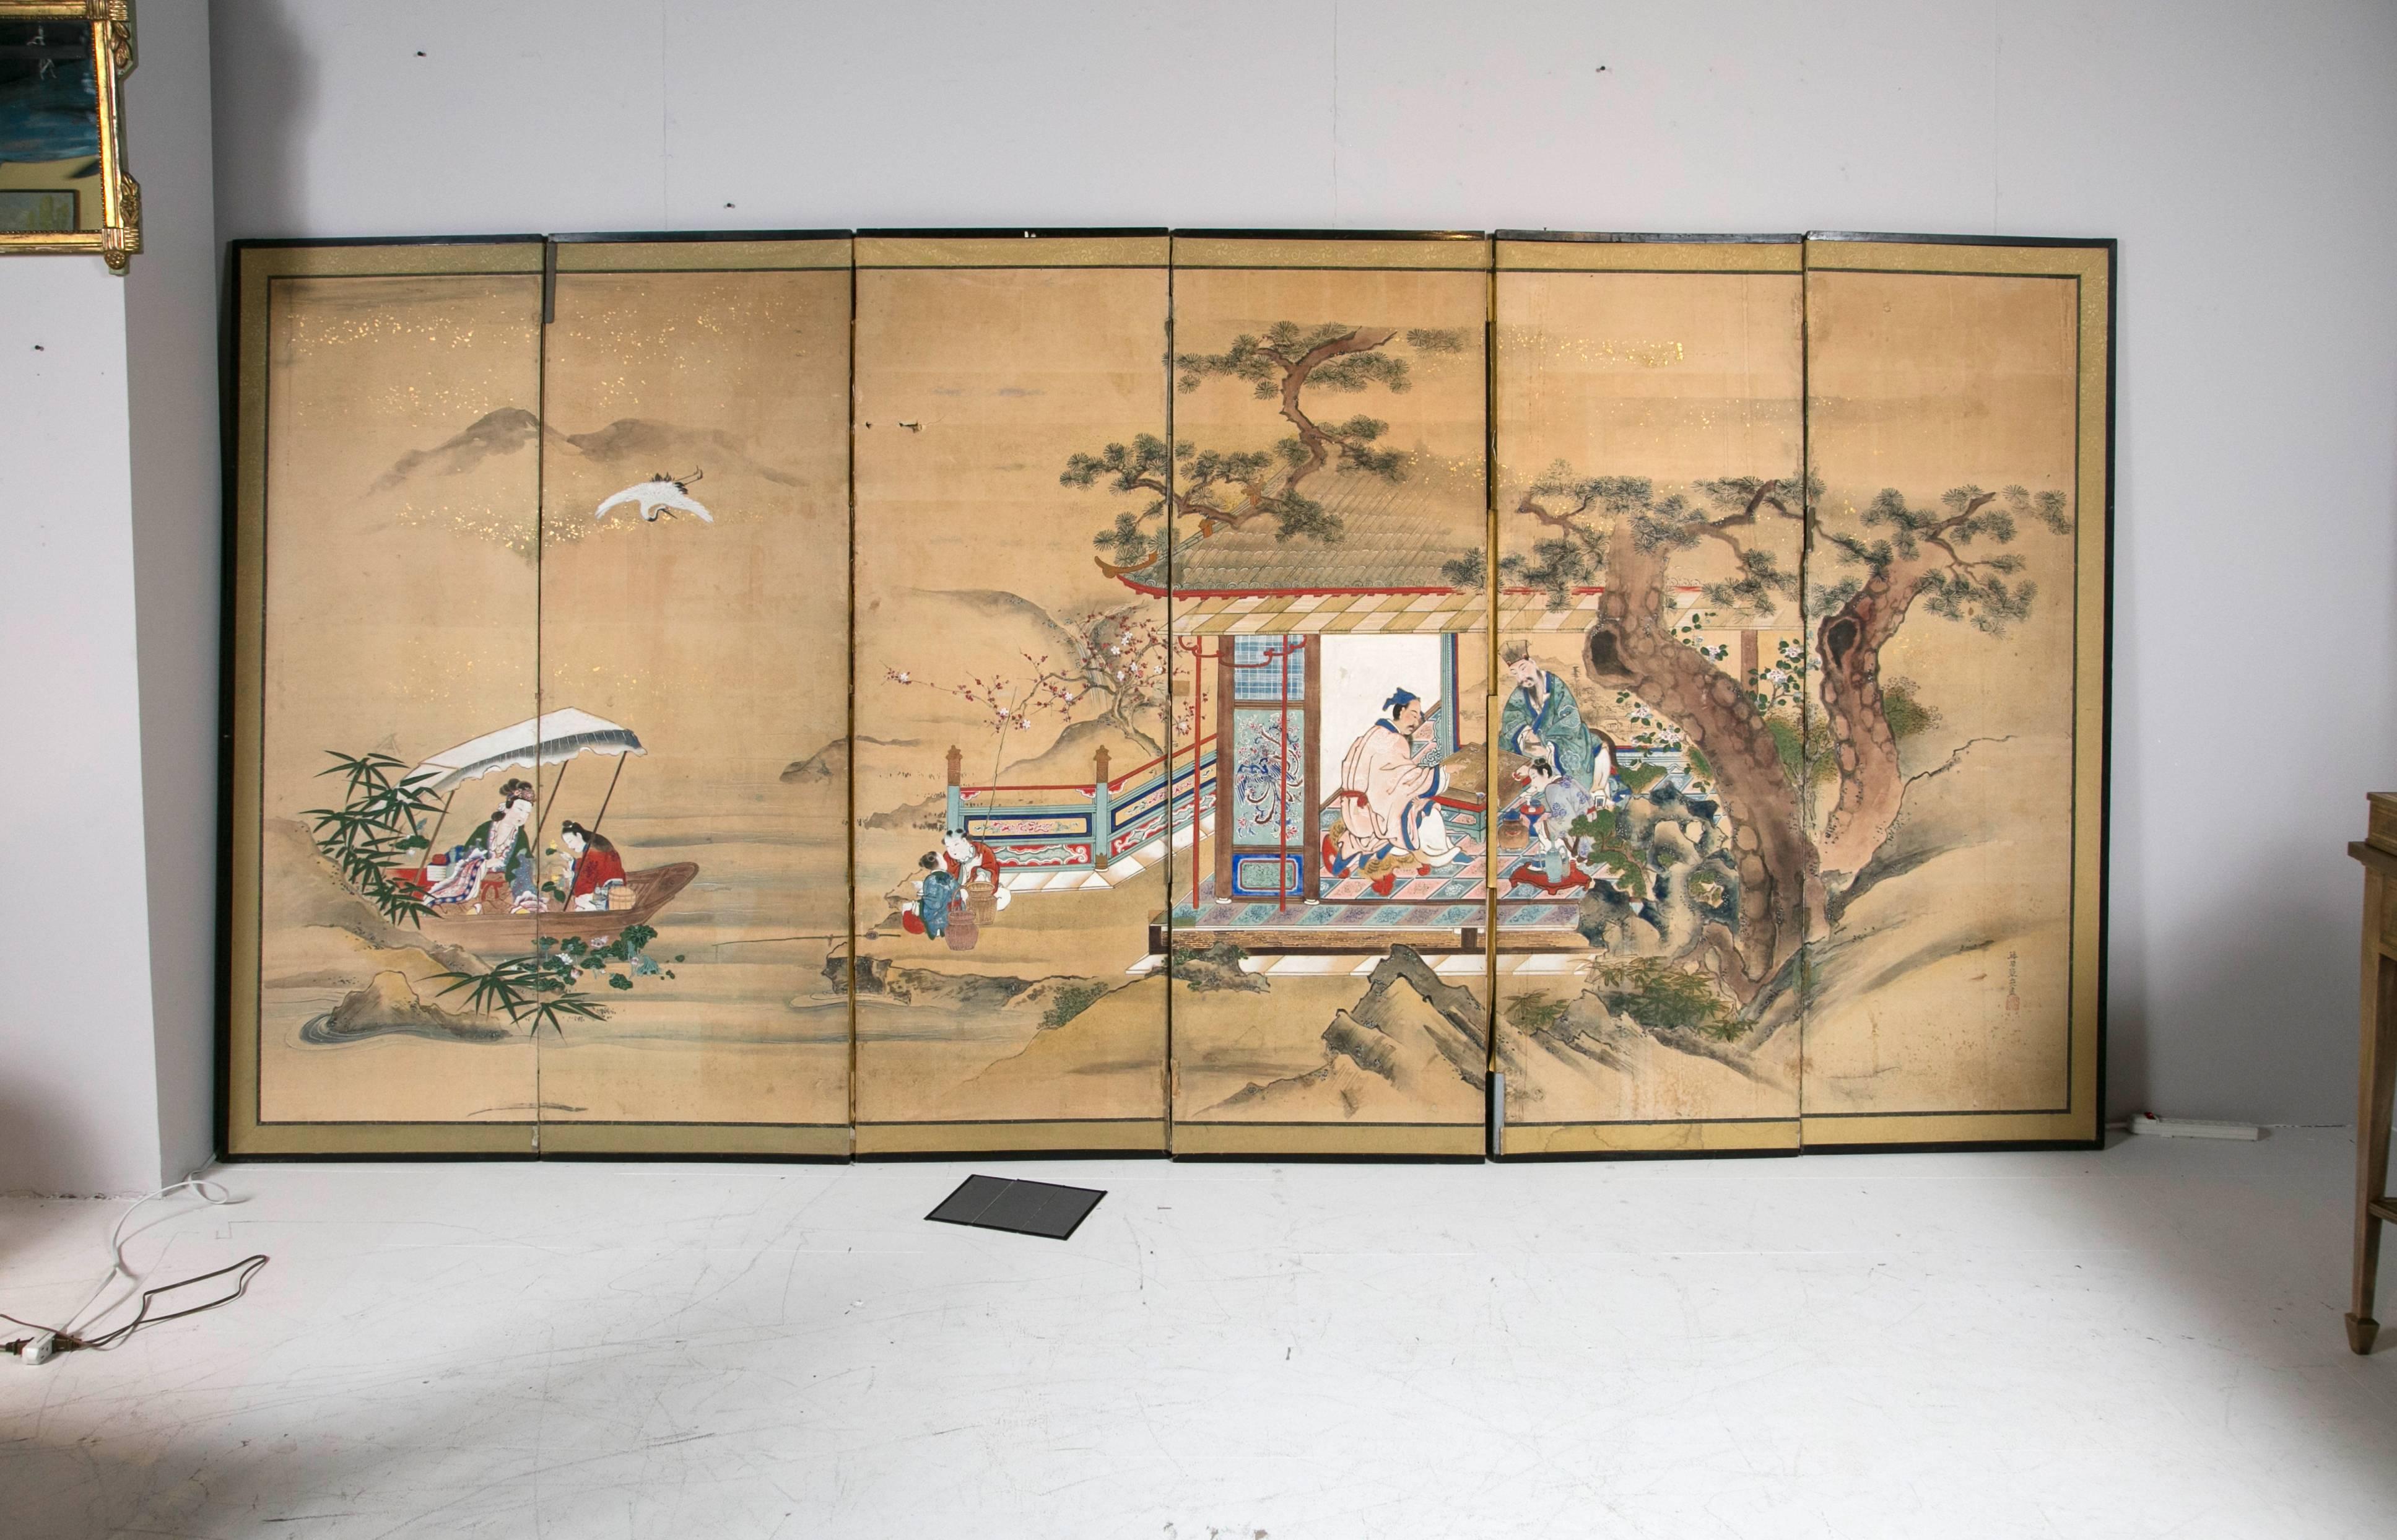 Stunning 18th century Japanese screen hand-painted great detail. Needs some restoration.